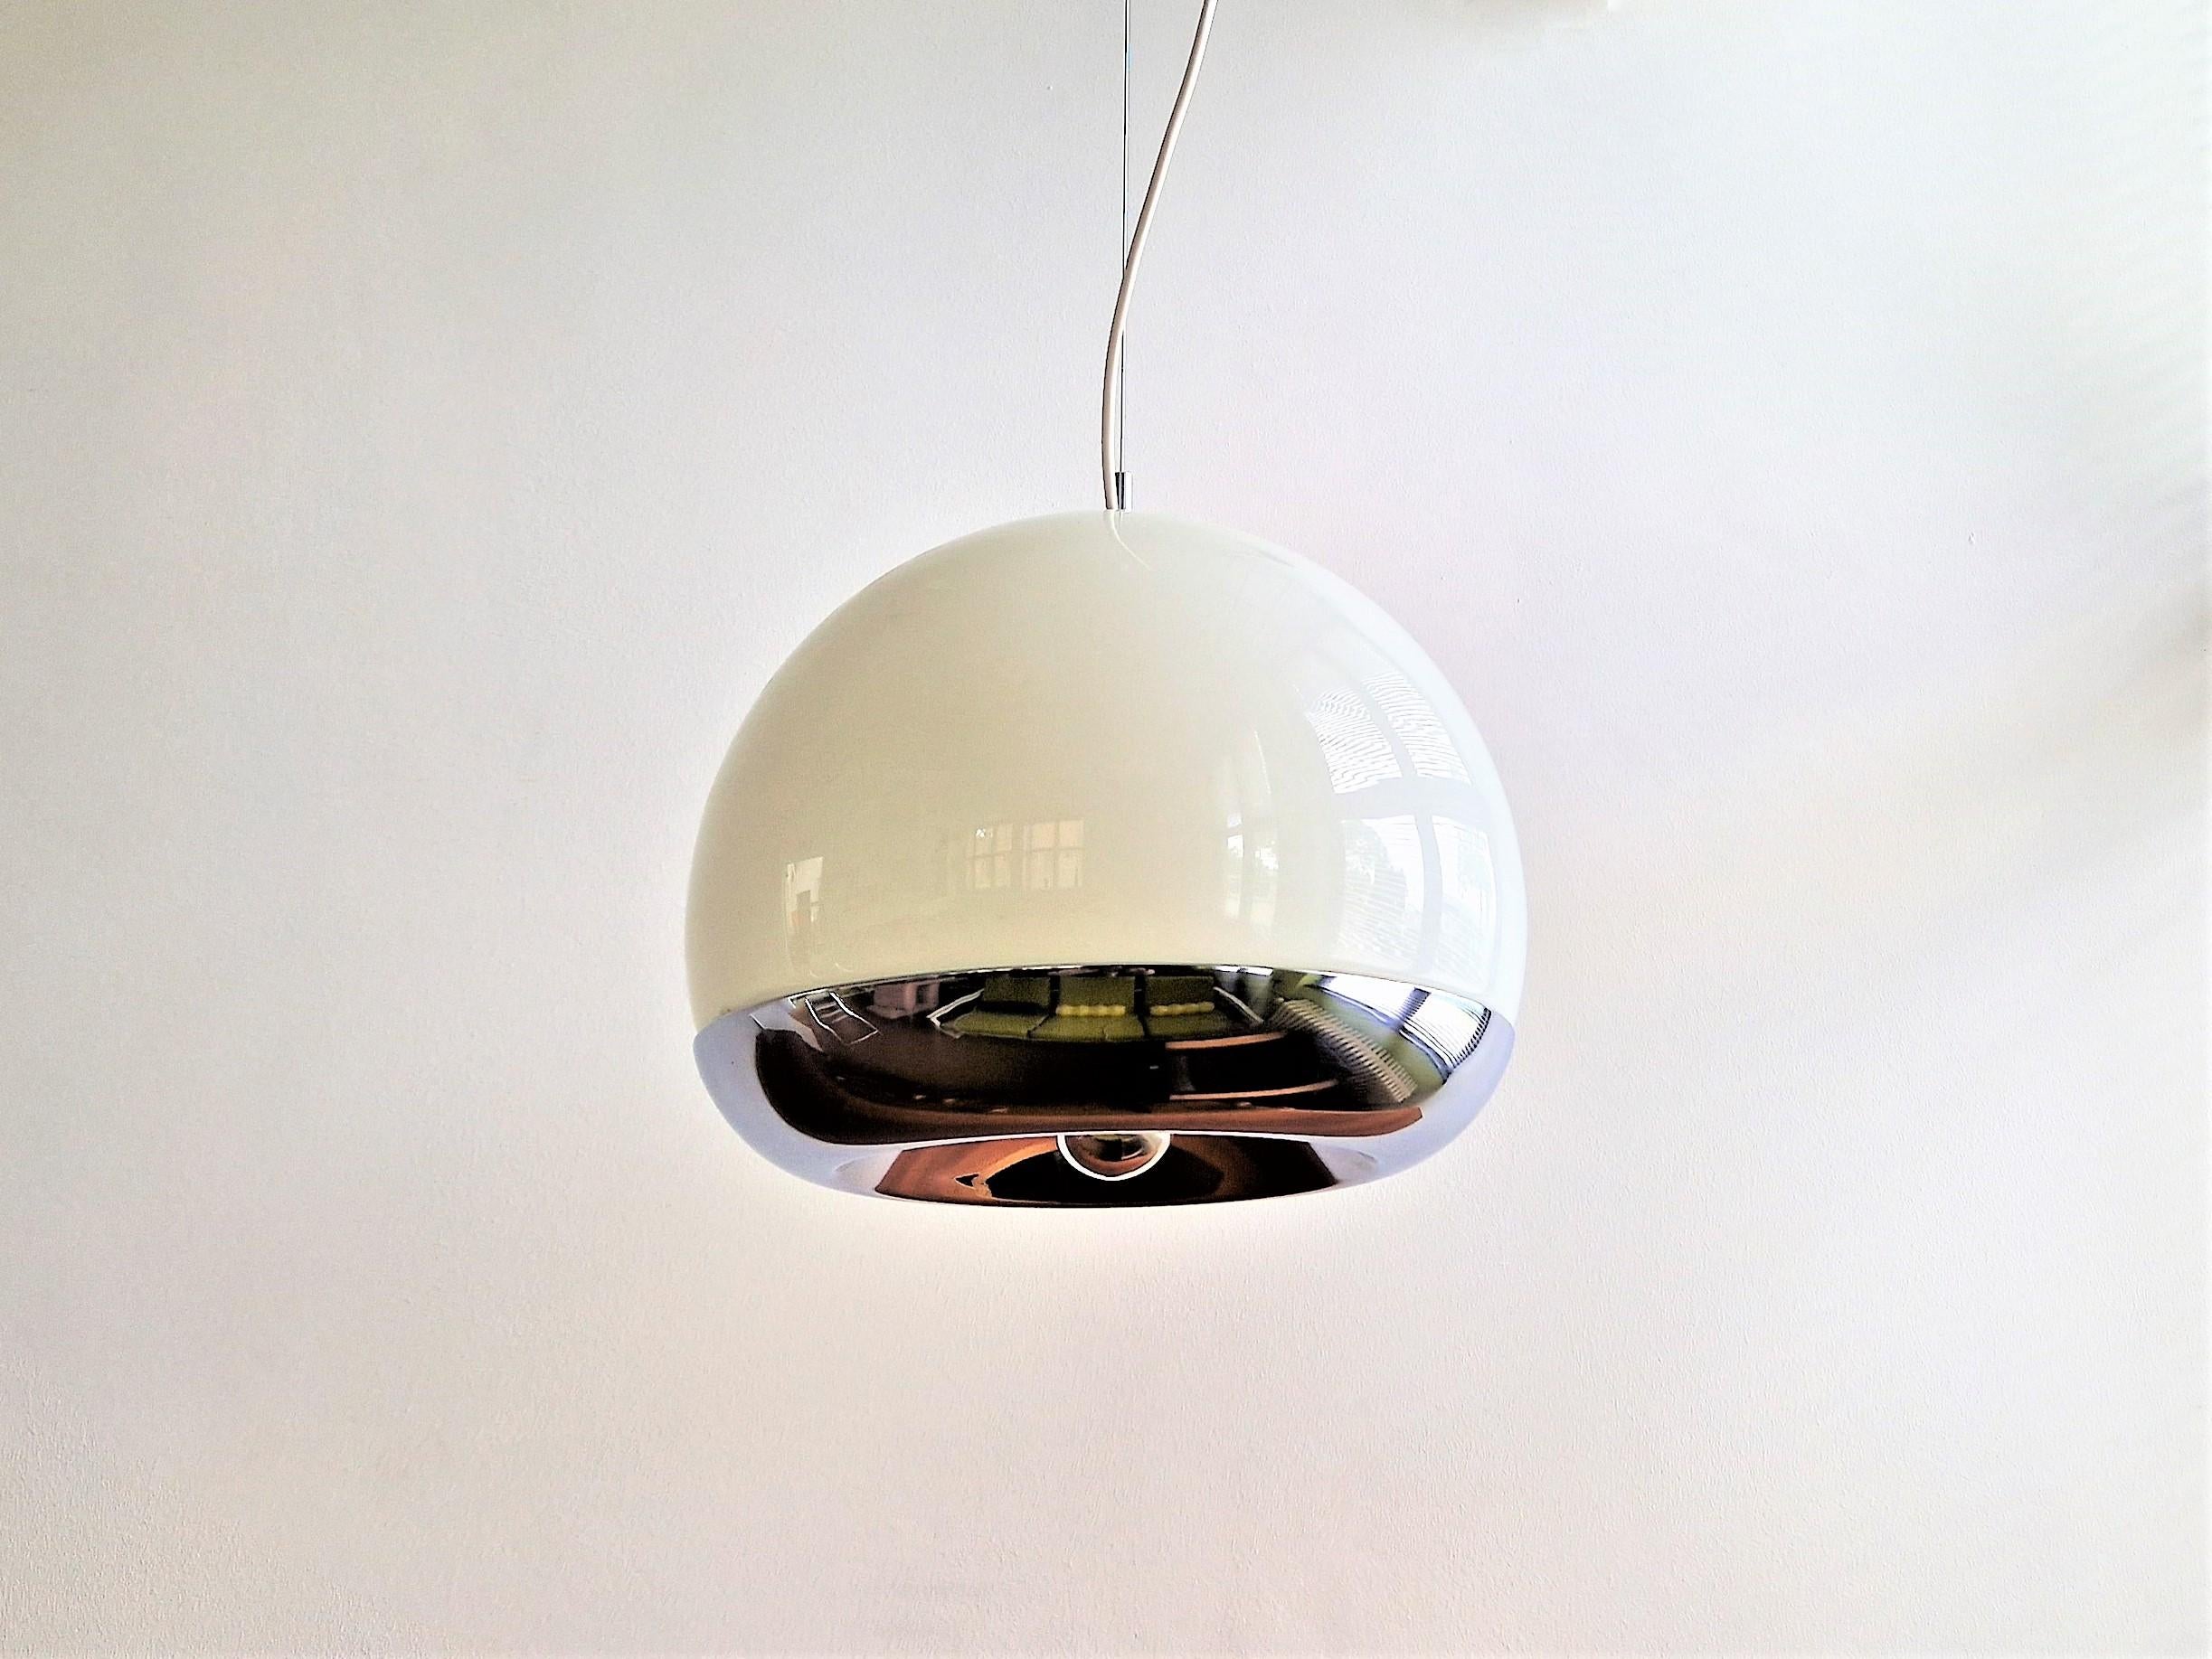 This beautiful pendant lamp was a production based on a project by the architects De Martini, Falconi & Fois for Reggiani. It consist out of a white opaline glass bowl that holds 2 lightbulbs, with a chromed metal bottom part that holds a single